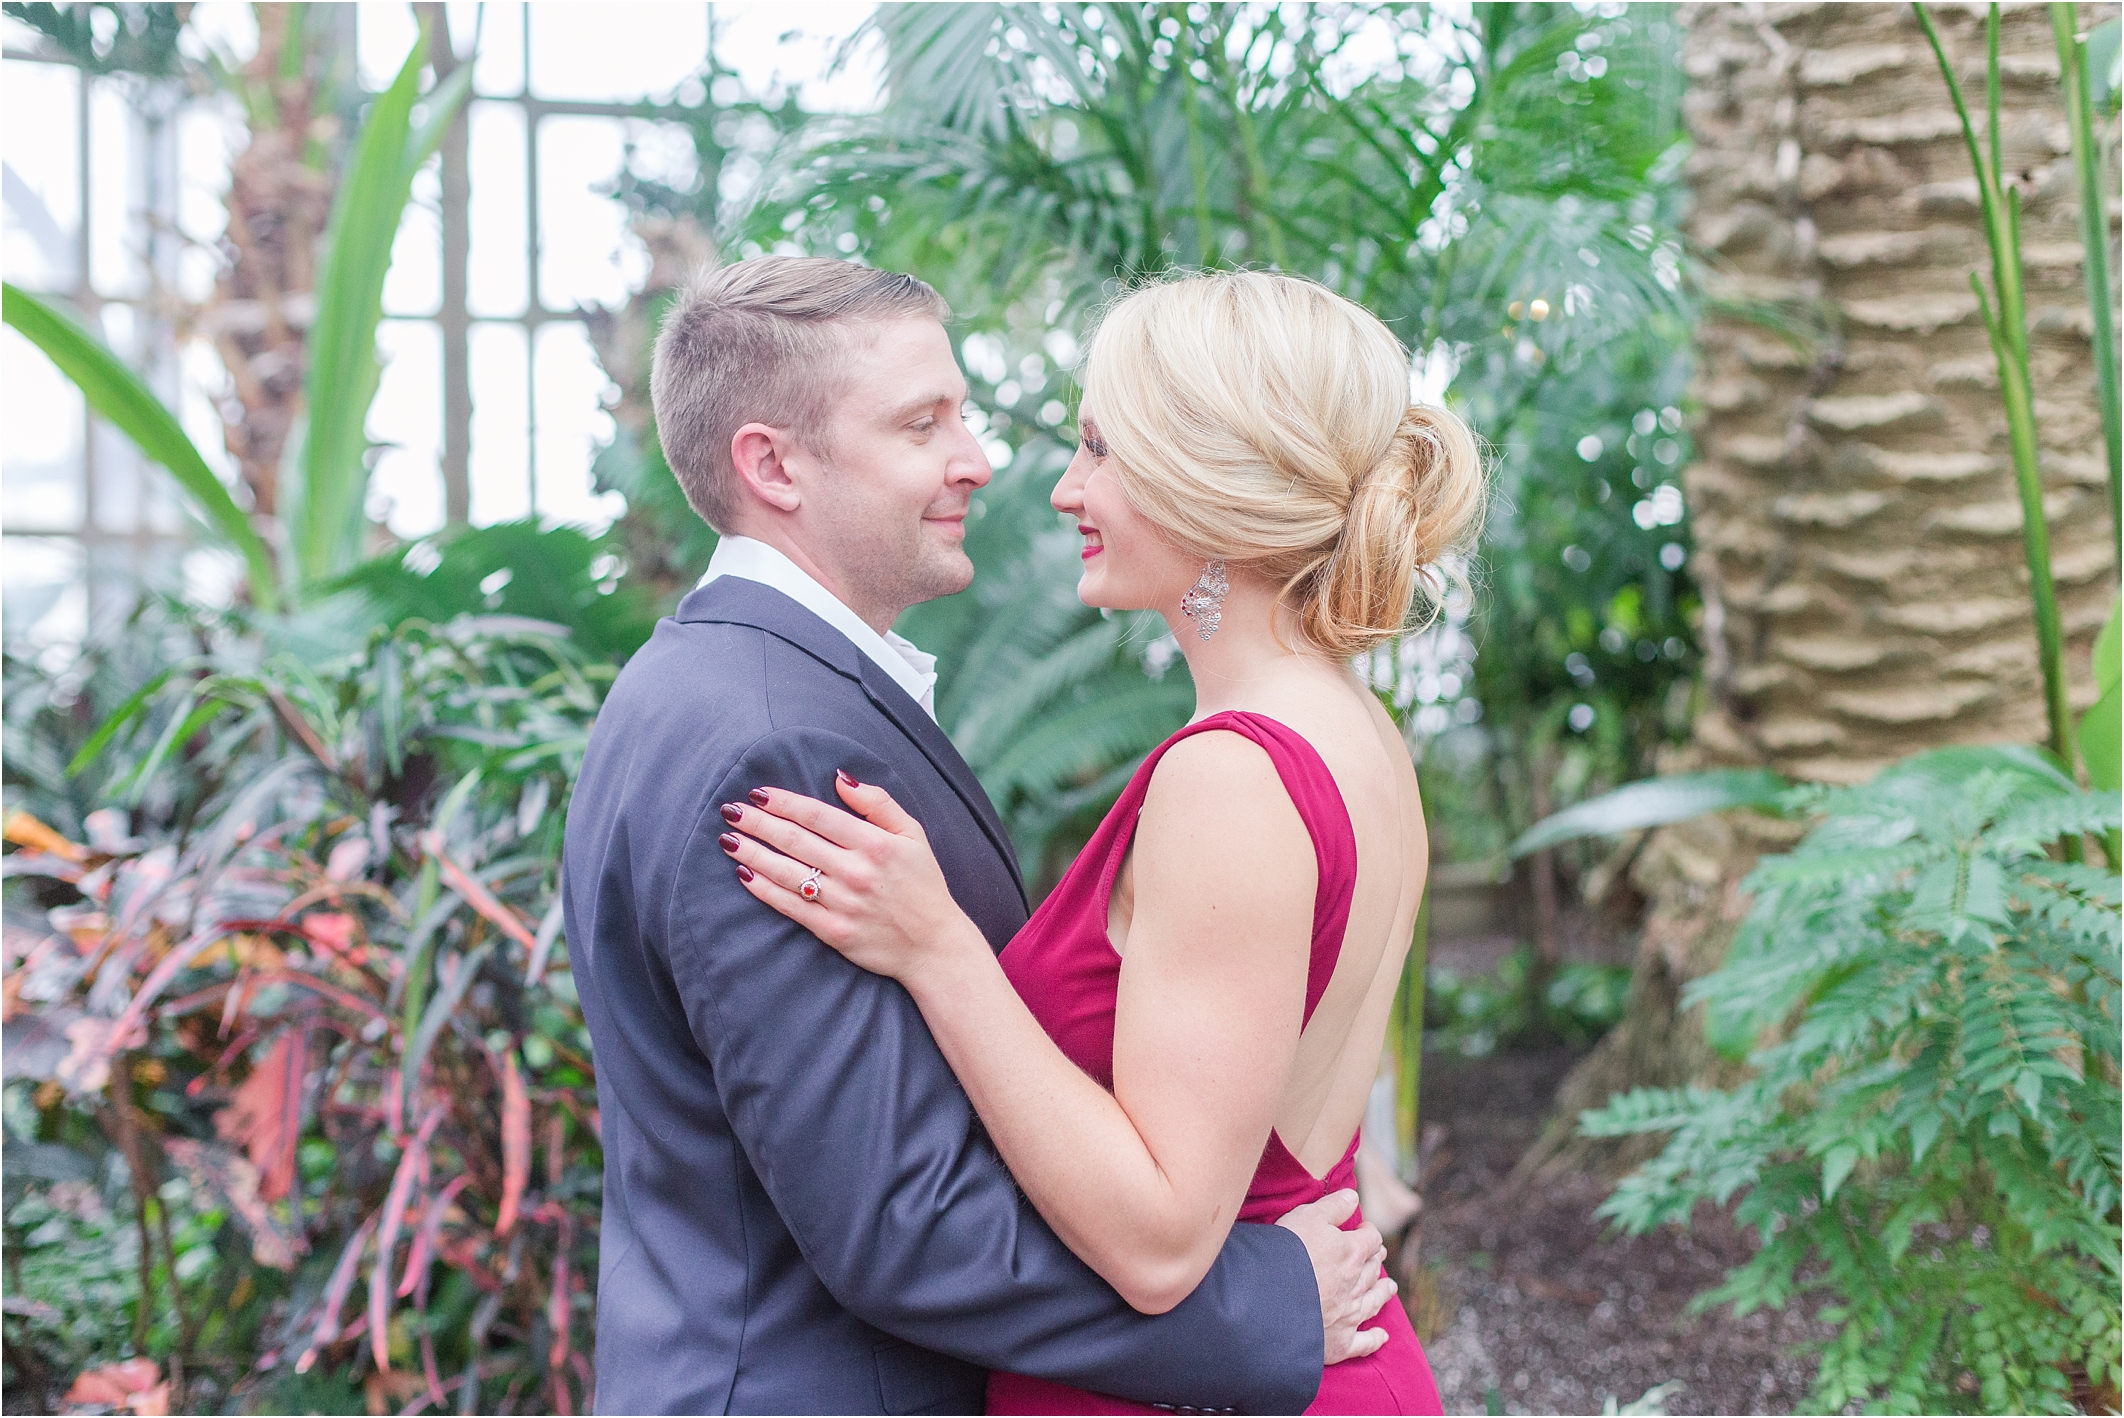 elegant-classic-belle-isle-conservatory-engagement-photos-in-detroit-mi-by-courtney-carolyn-photography_0013.jpg